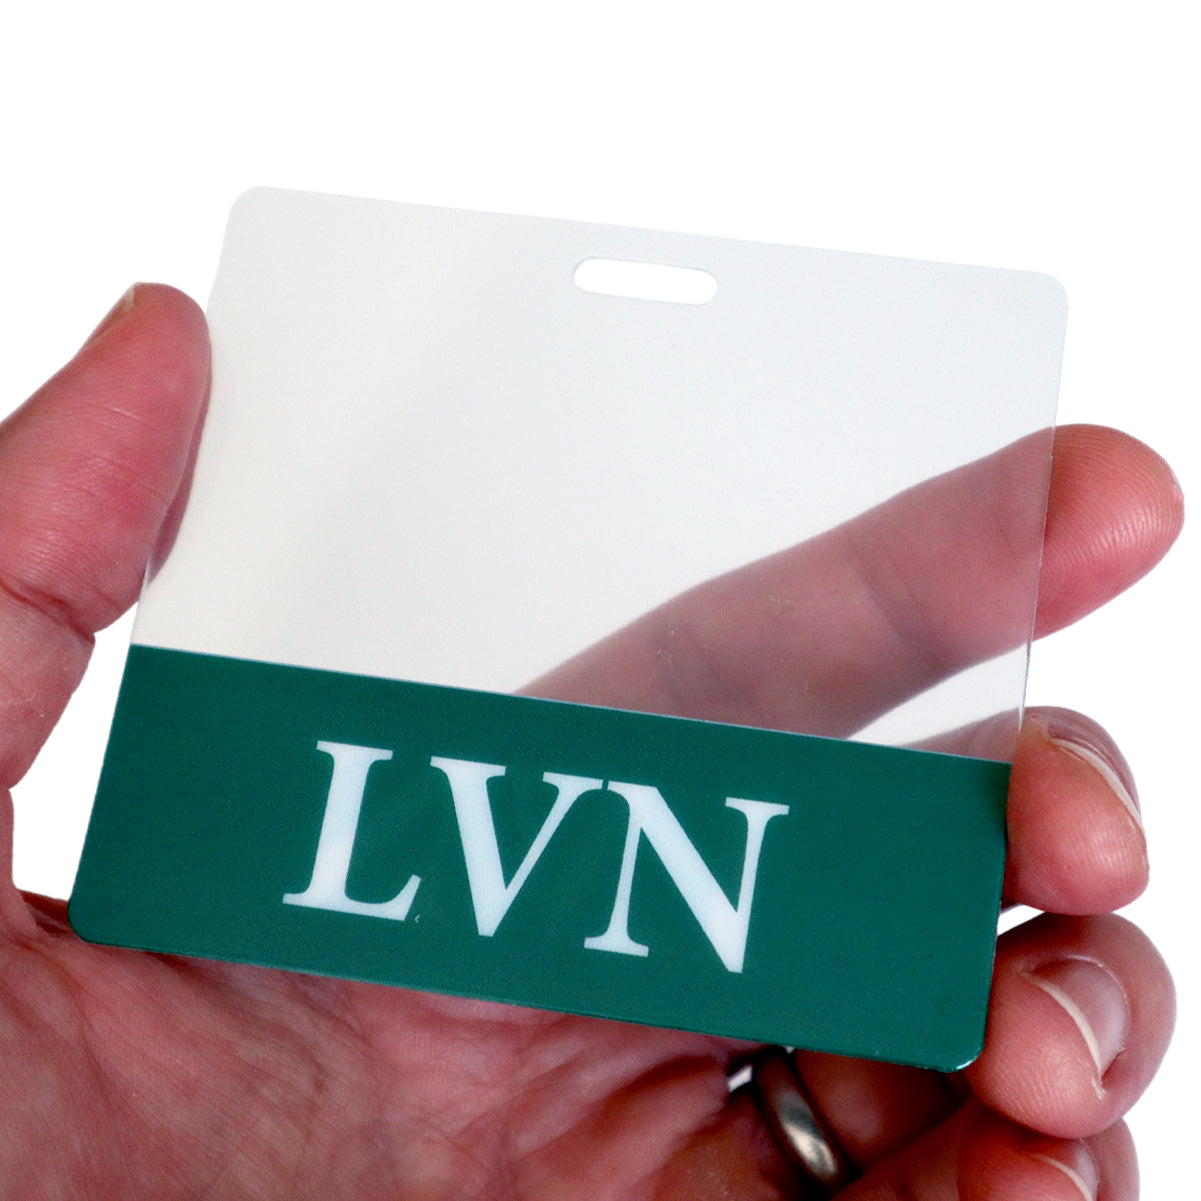 Hand holding a blank name badge with a green stripe at the bottom featuring the letters "LVN", acting as a perfect Clear LVN Badge Buddy - Horizontal ID Badge Backer for Licensed Vocational Nurses - Double Sided Print.